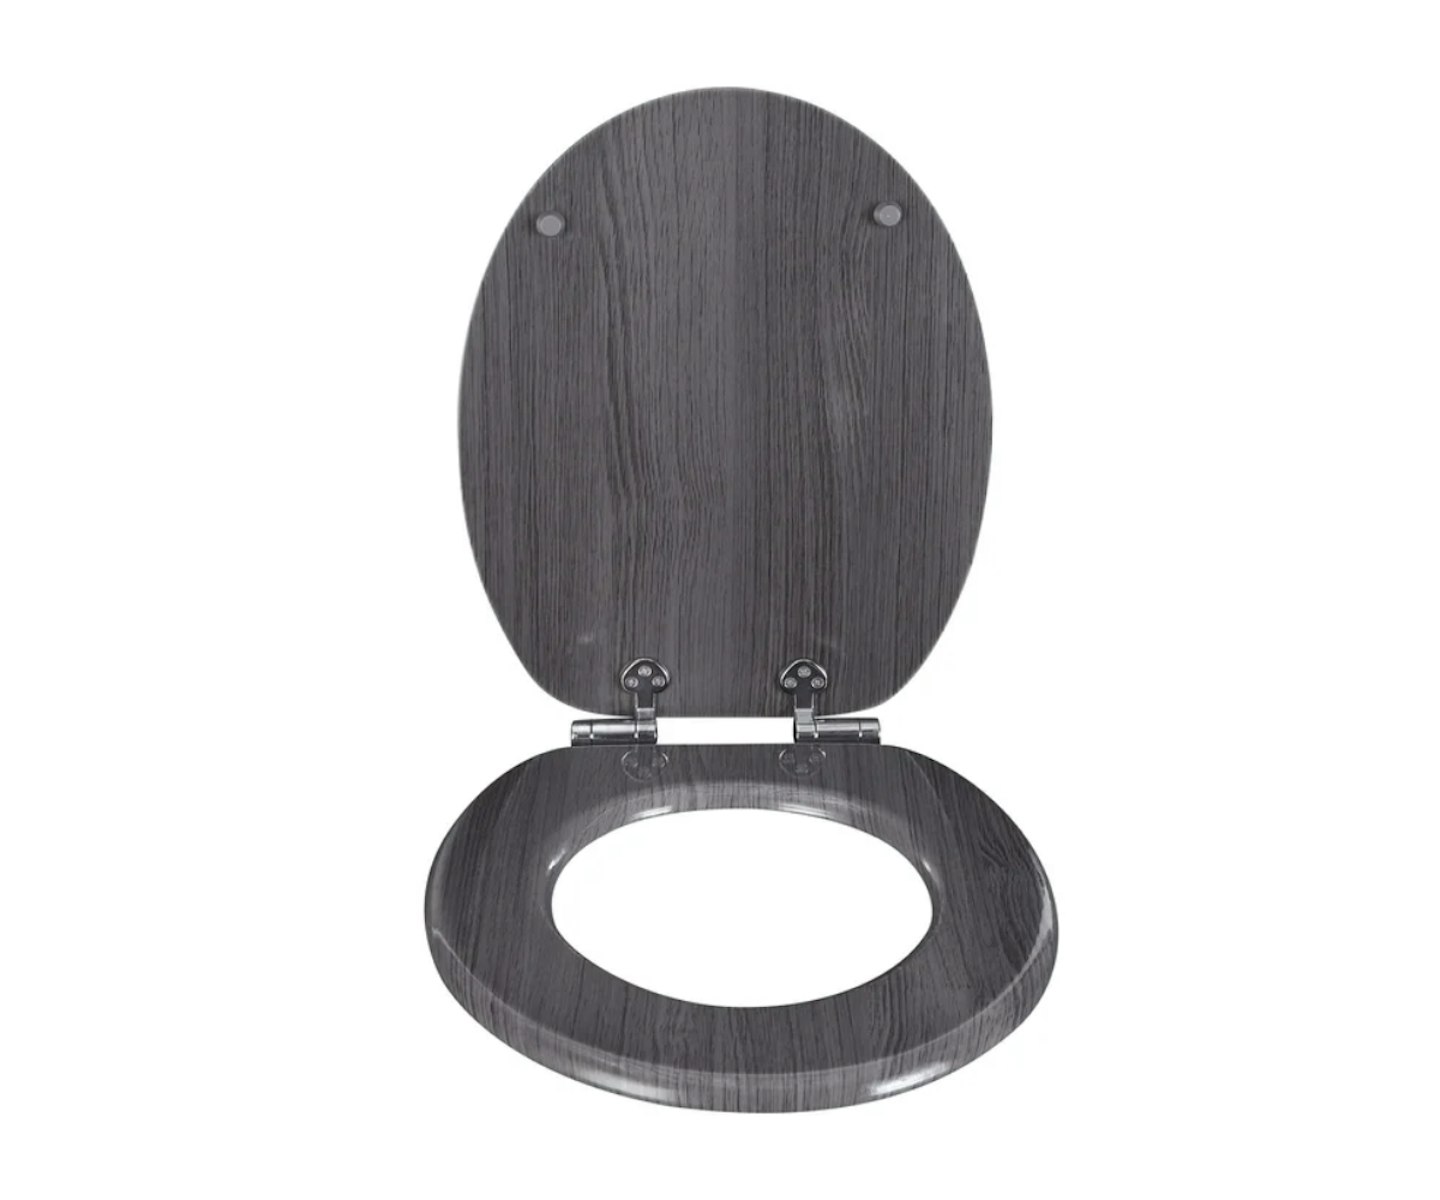 East Urban Home Premium Toilet Seat With Soft Close